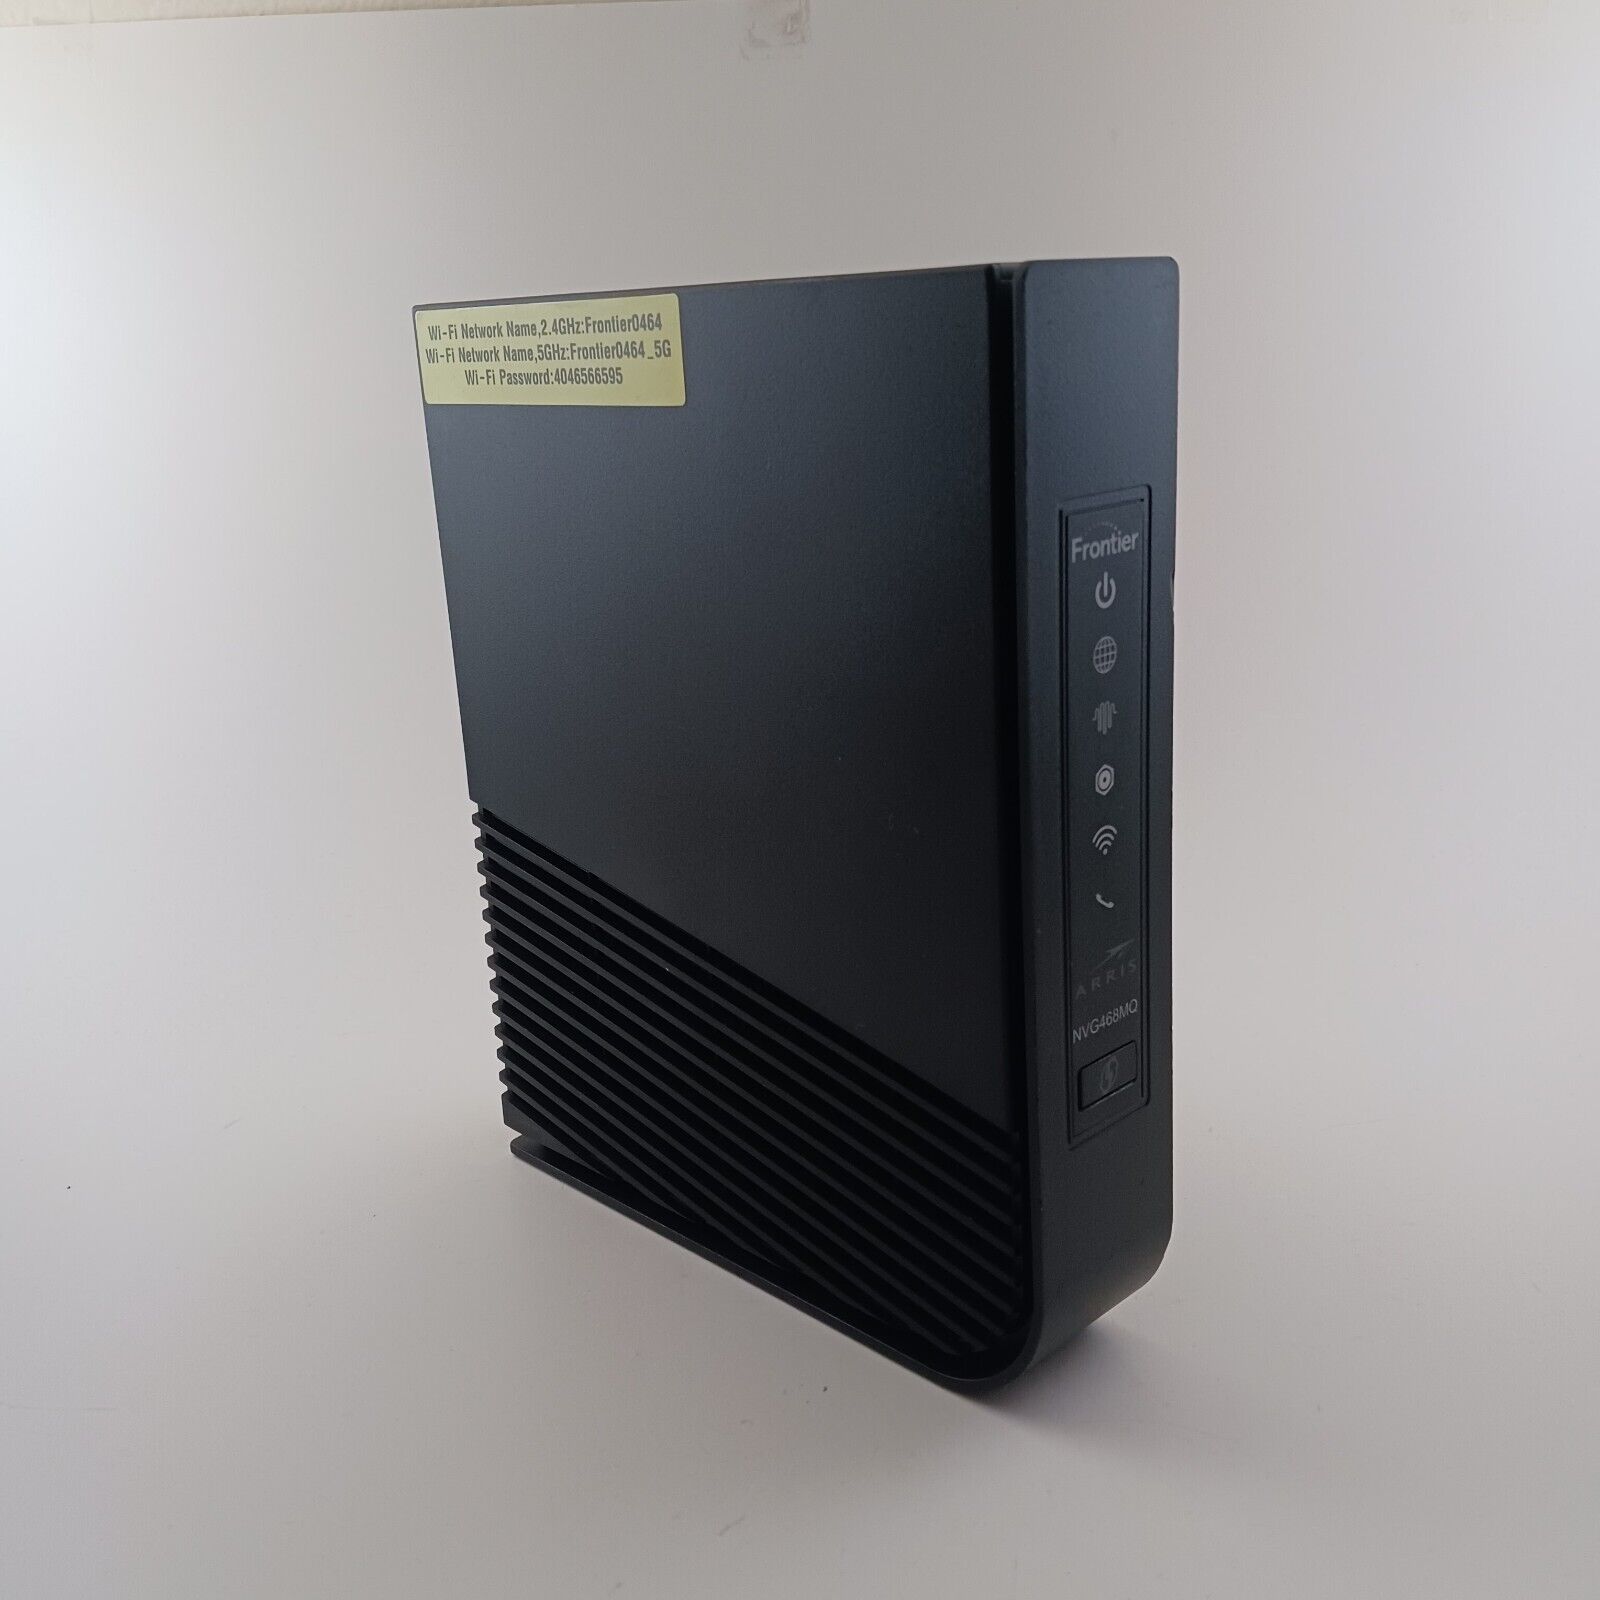 Arris Frontier Ethernet Gateway Wi-Fi Modem Router NVG468MQ Adapter Not Included